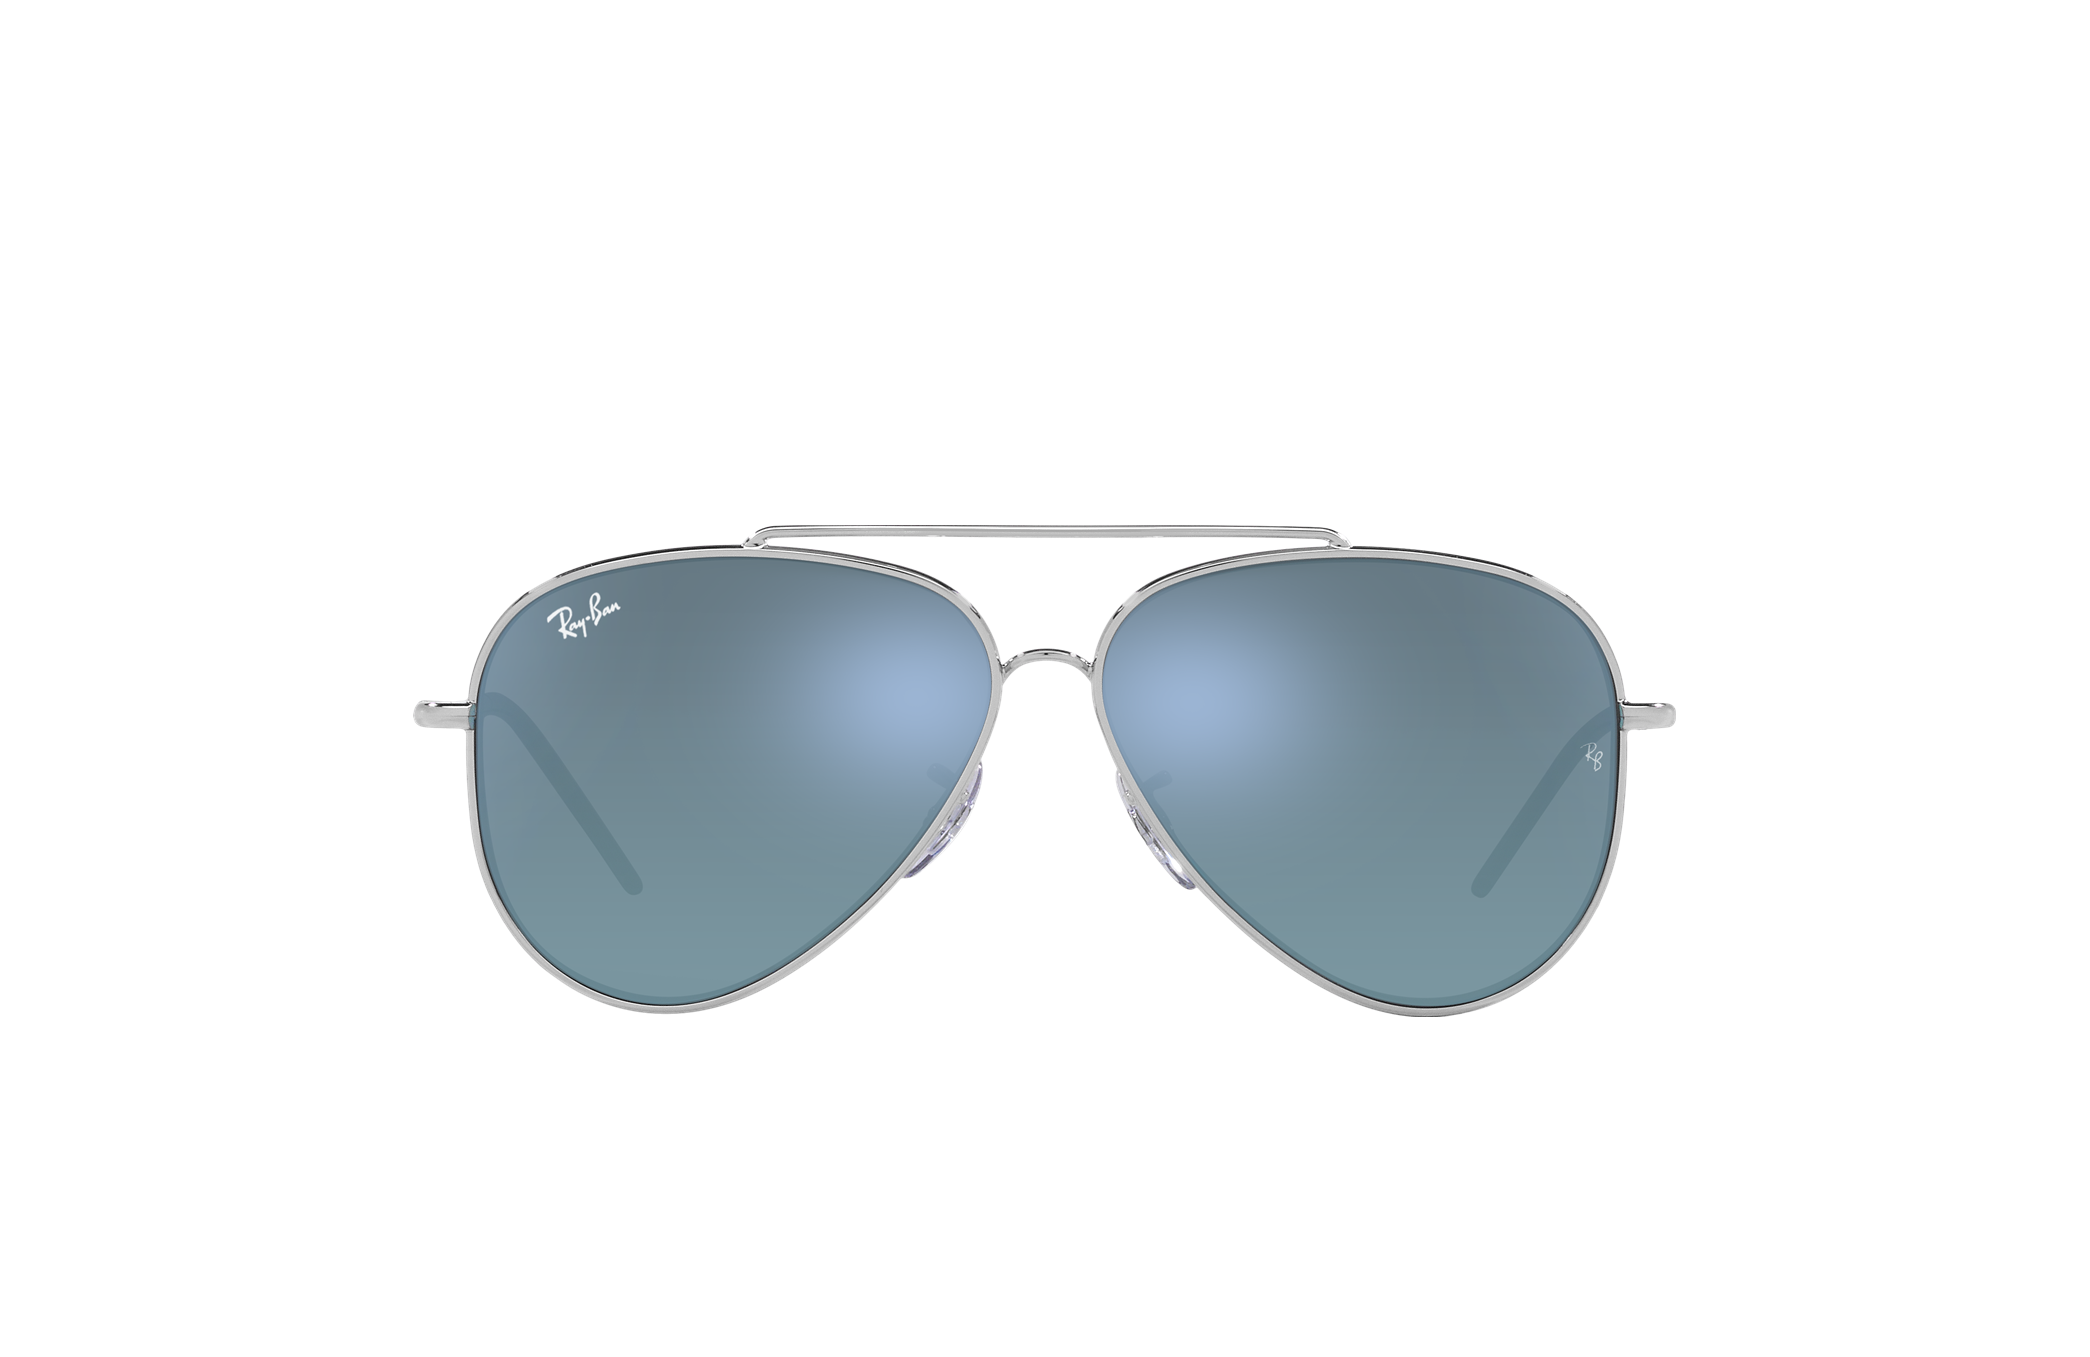 Aviator Reverse Sunglasses in Silver and Light Blue - RBR0101S | Ray-Ban® EU